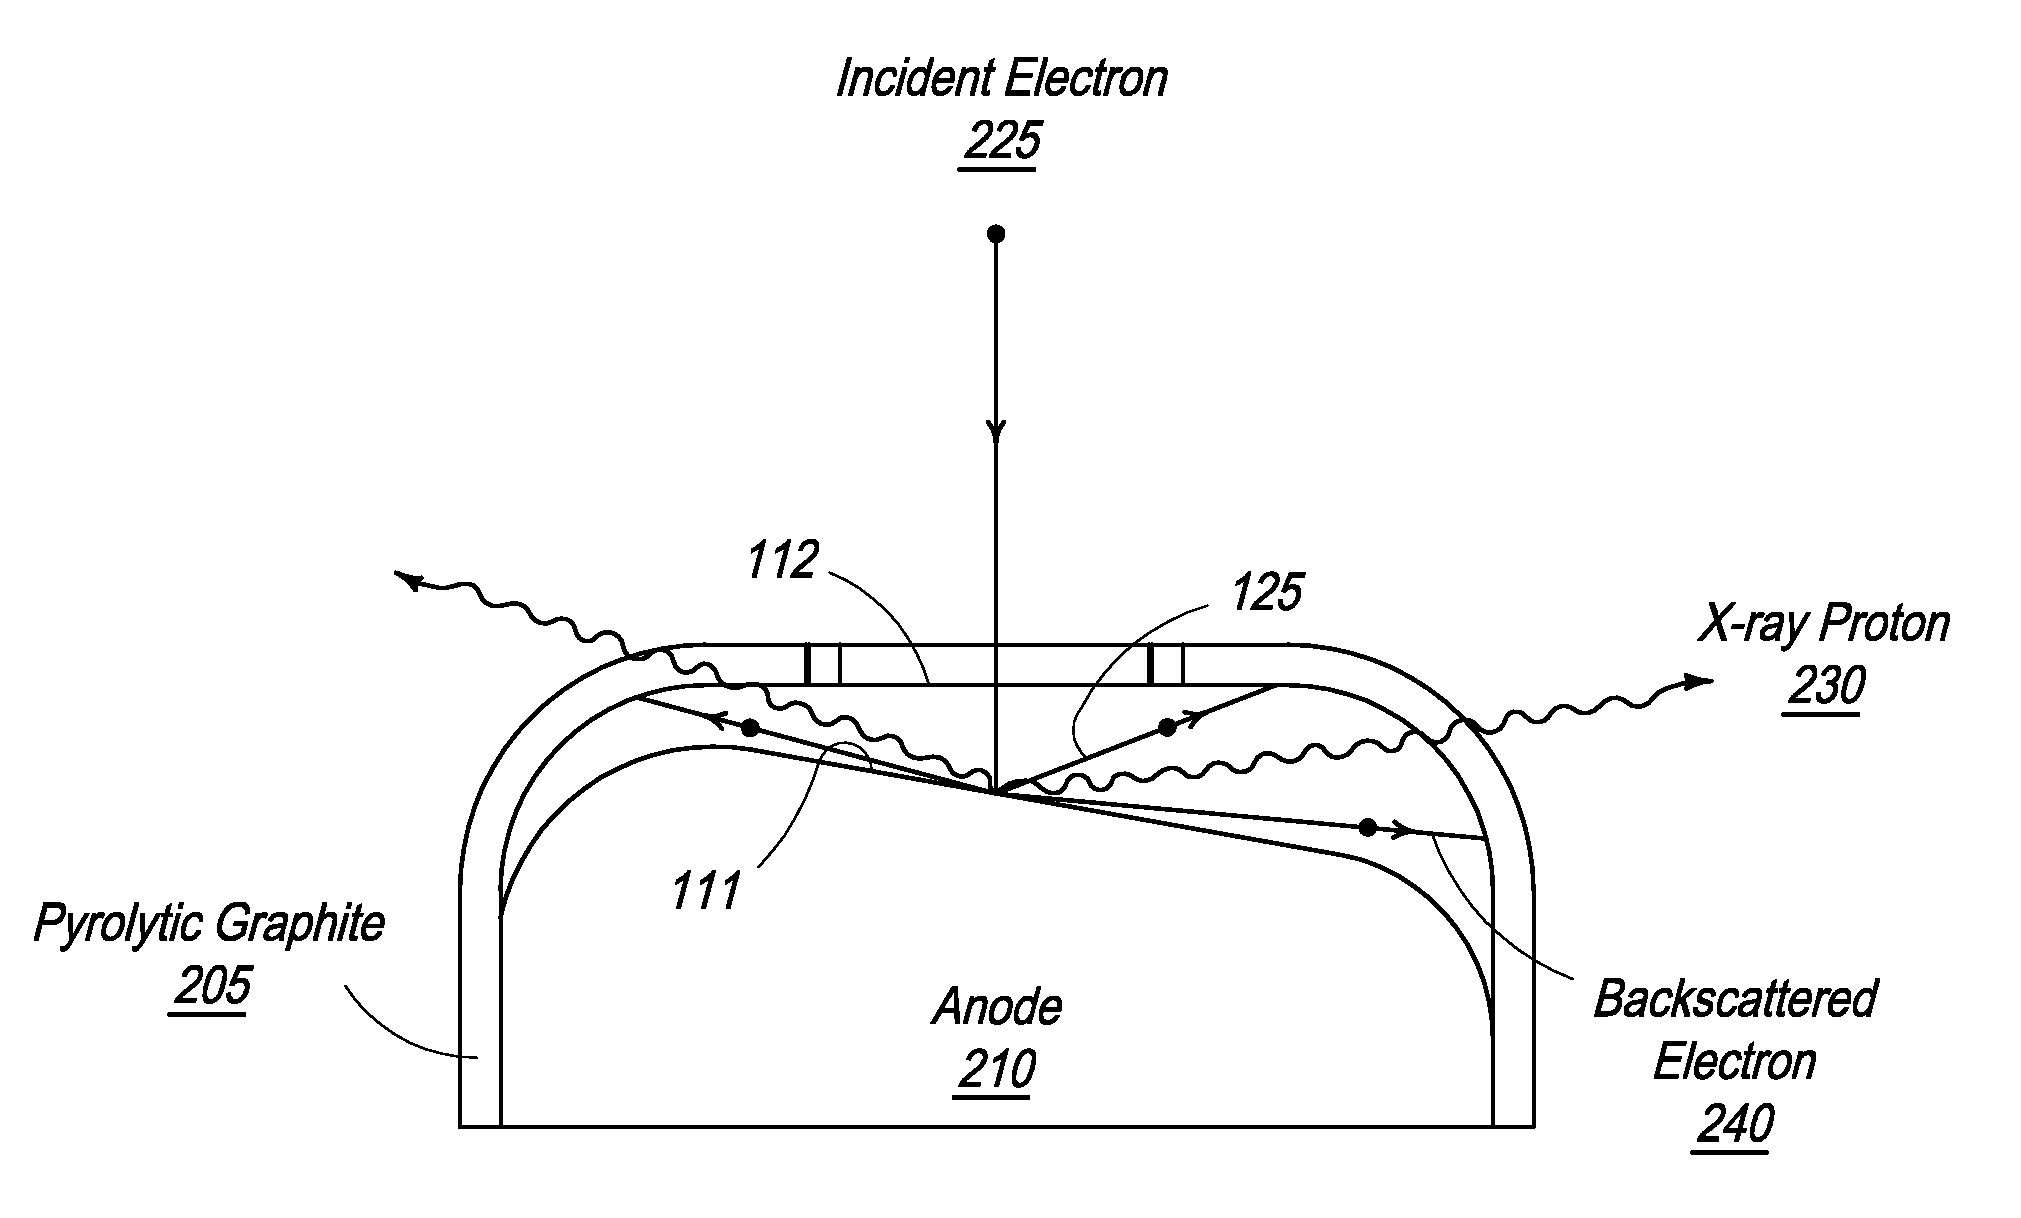 Graphite backscattered electron shield for use in an X-ray tube